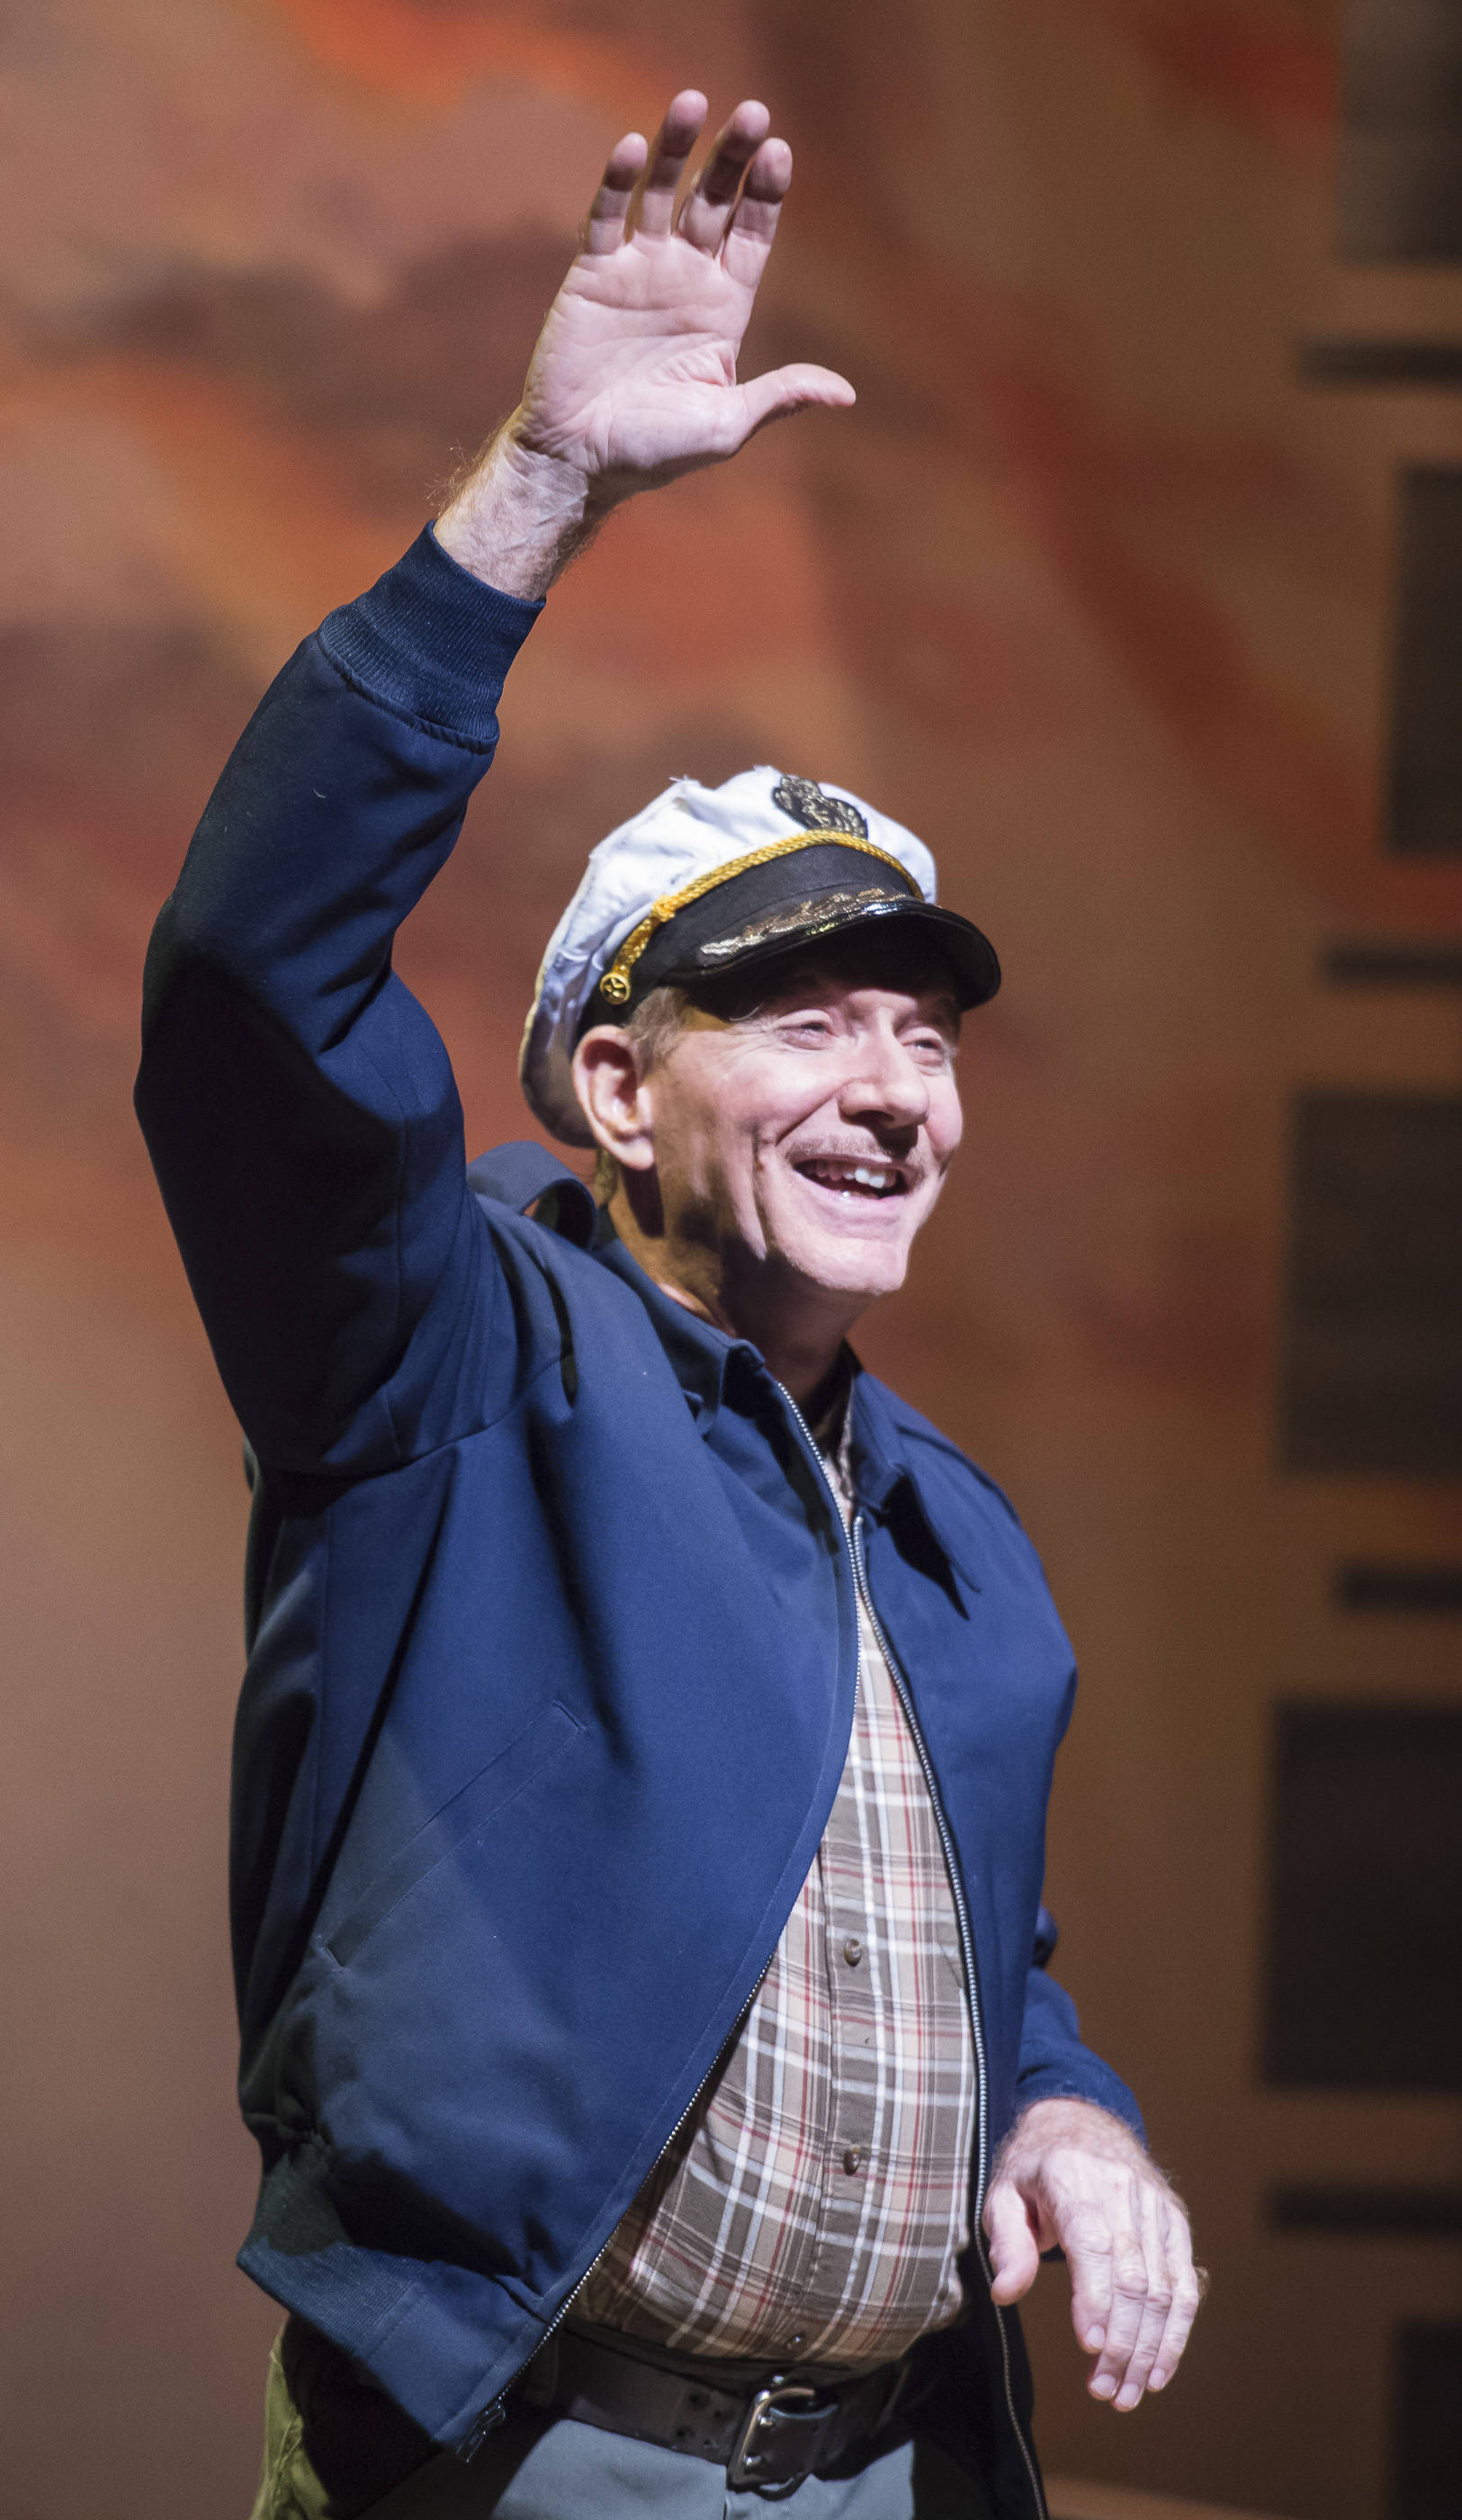 John Barrymore is played by Peter DeLaurier during Perseverance Theatre’s production of Joel Bennett’s “Dreaming Glacier Bay” on Tuesday, Oct. 25, 2017. (Michael Penn | Capital City Weekly)